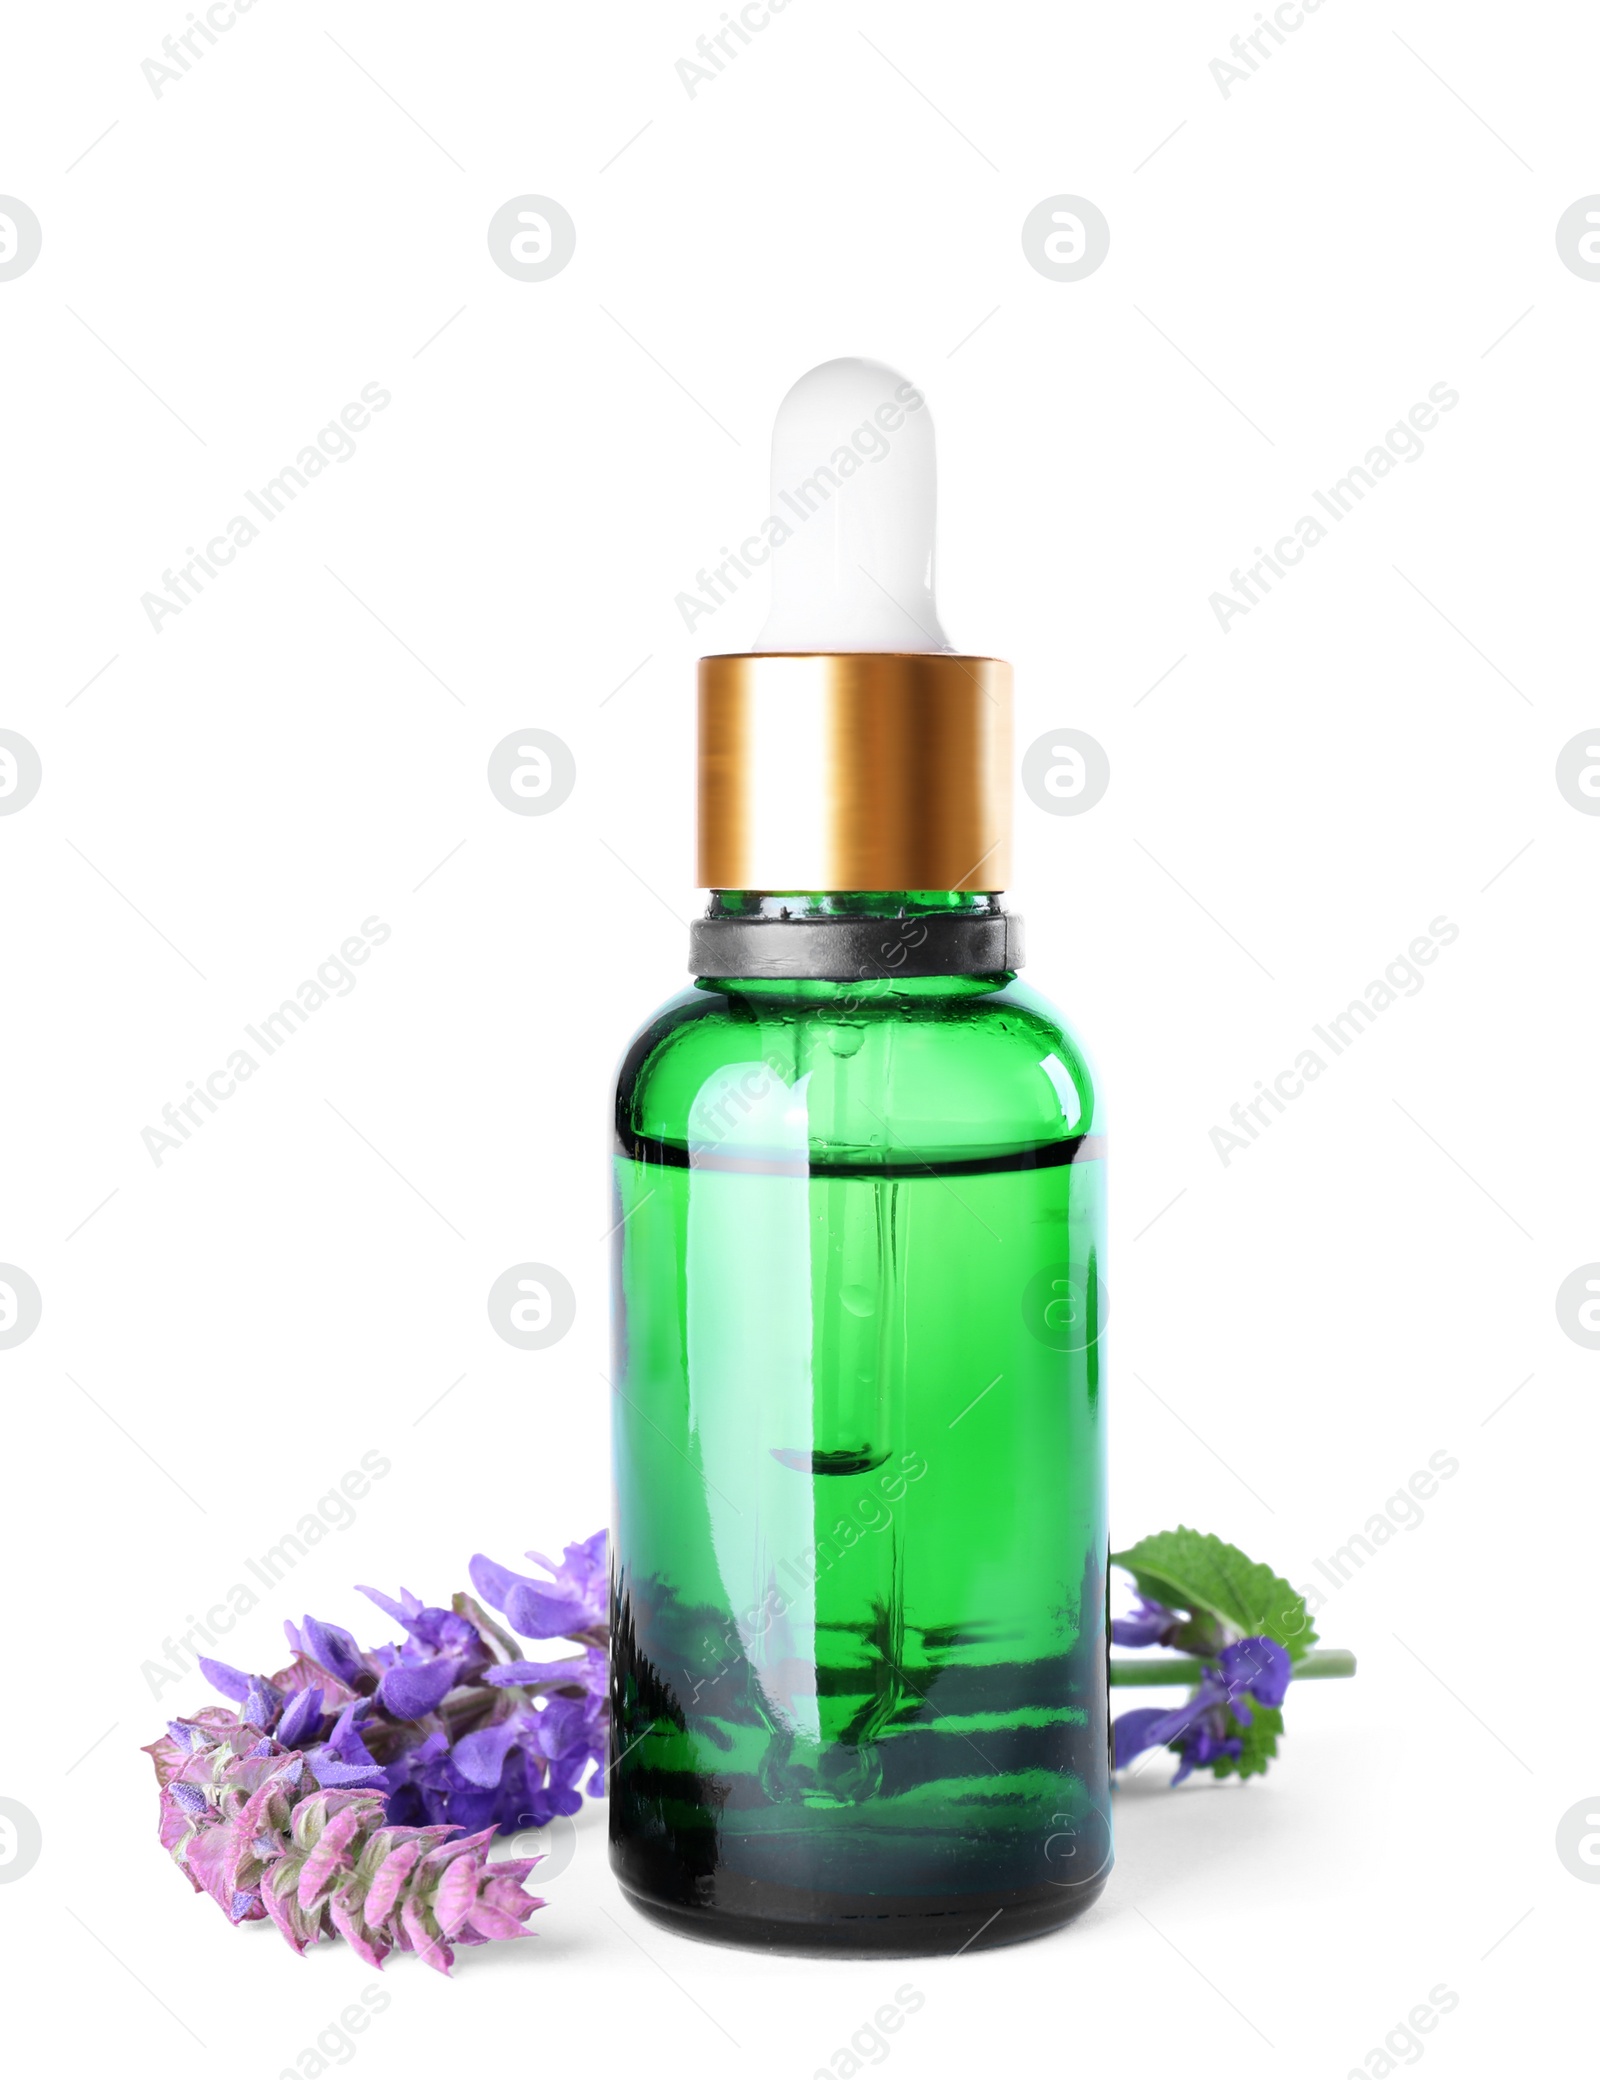 Photo of Bottle of sage essential oil and flowers isolated on white